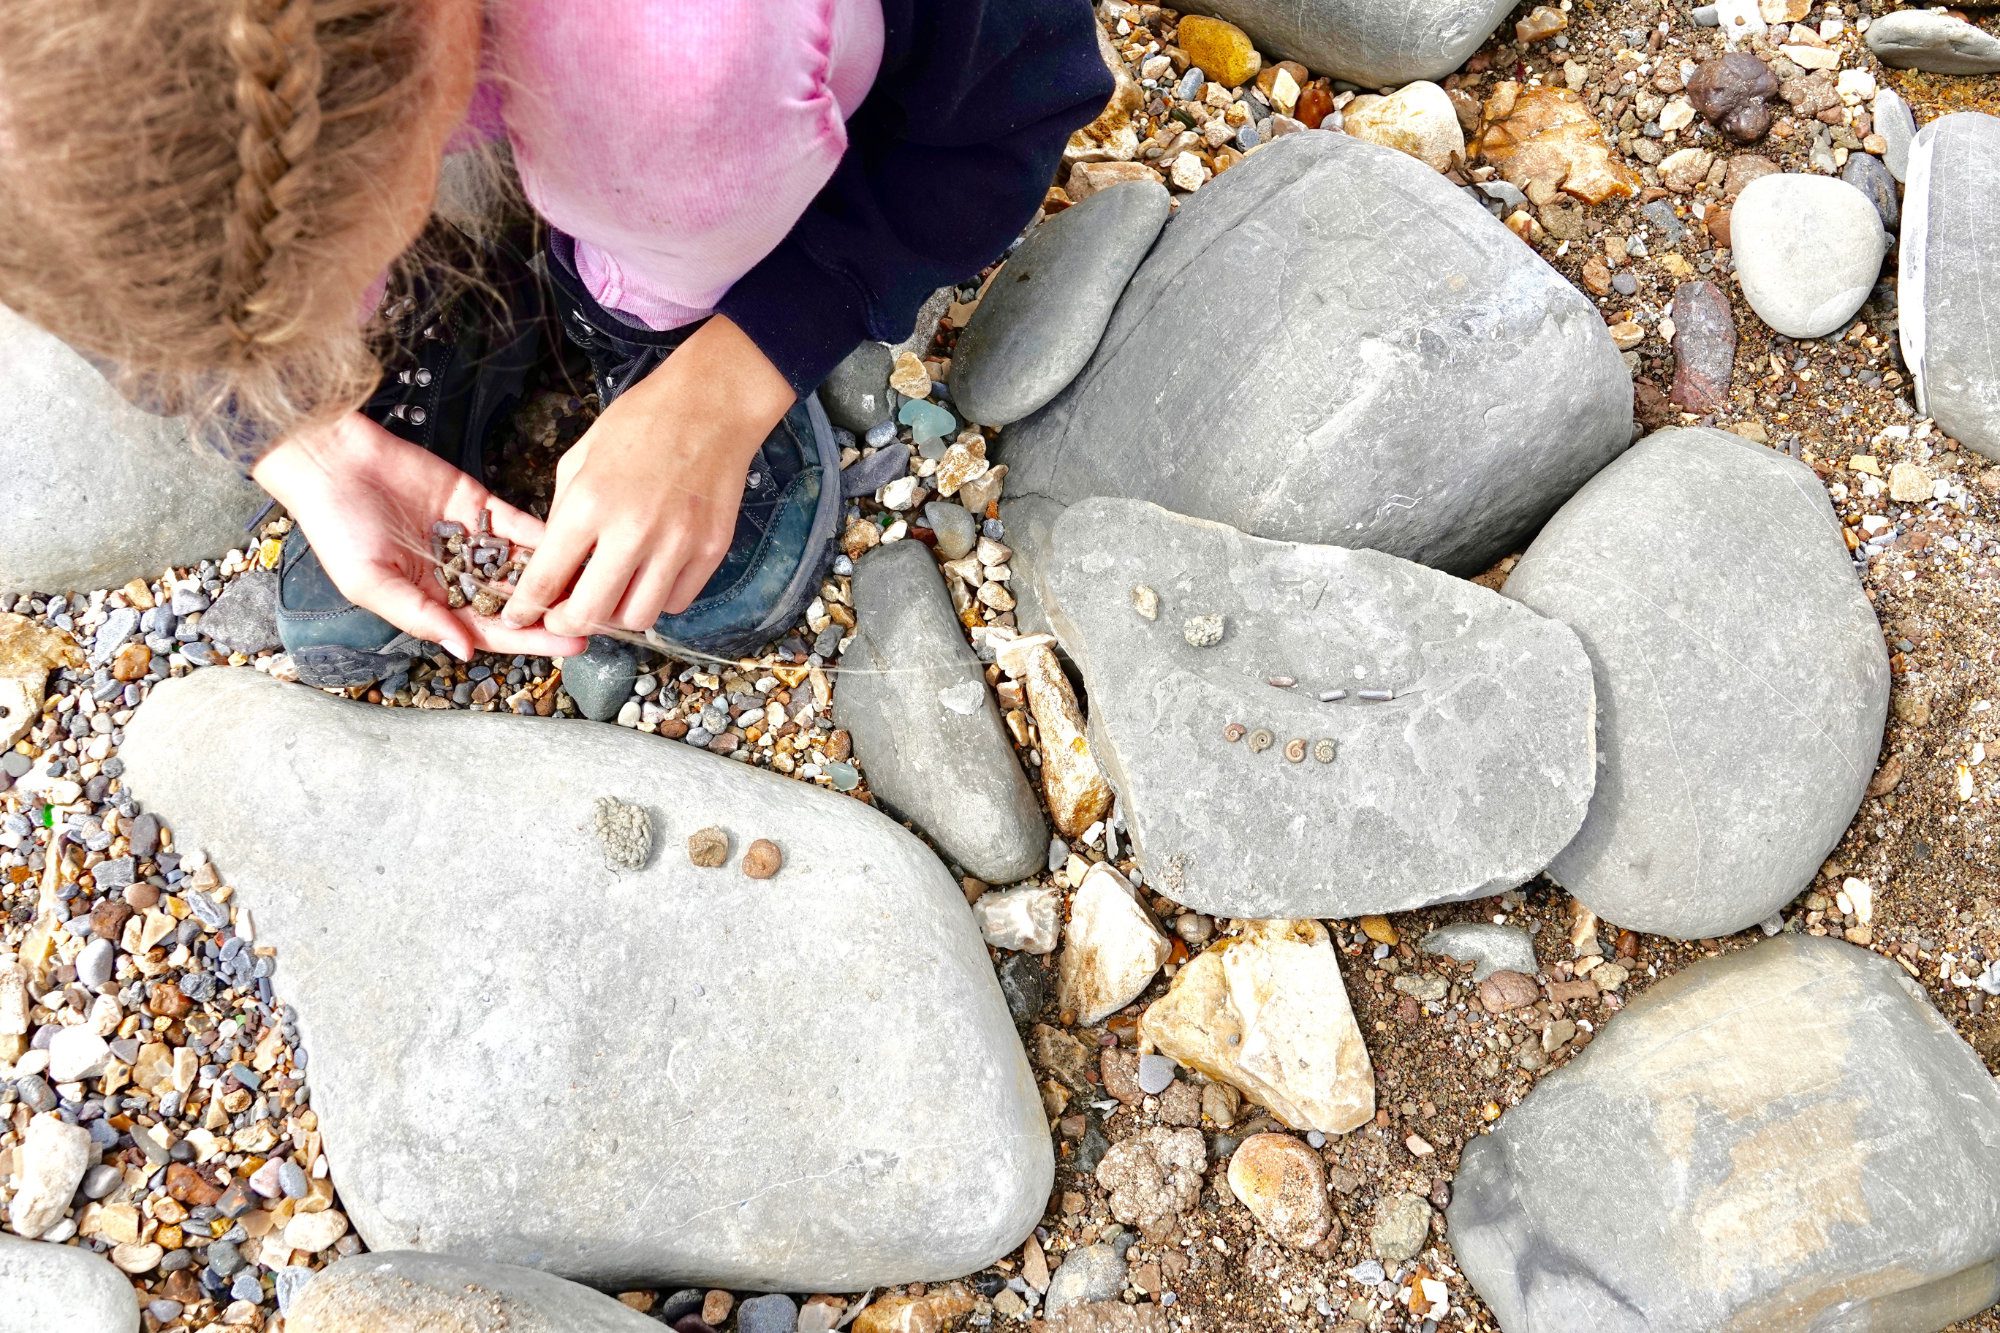 Child looking at rocks on a beach